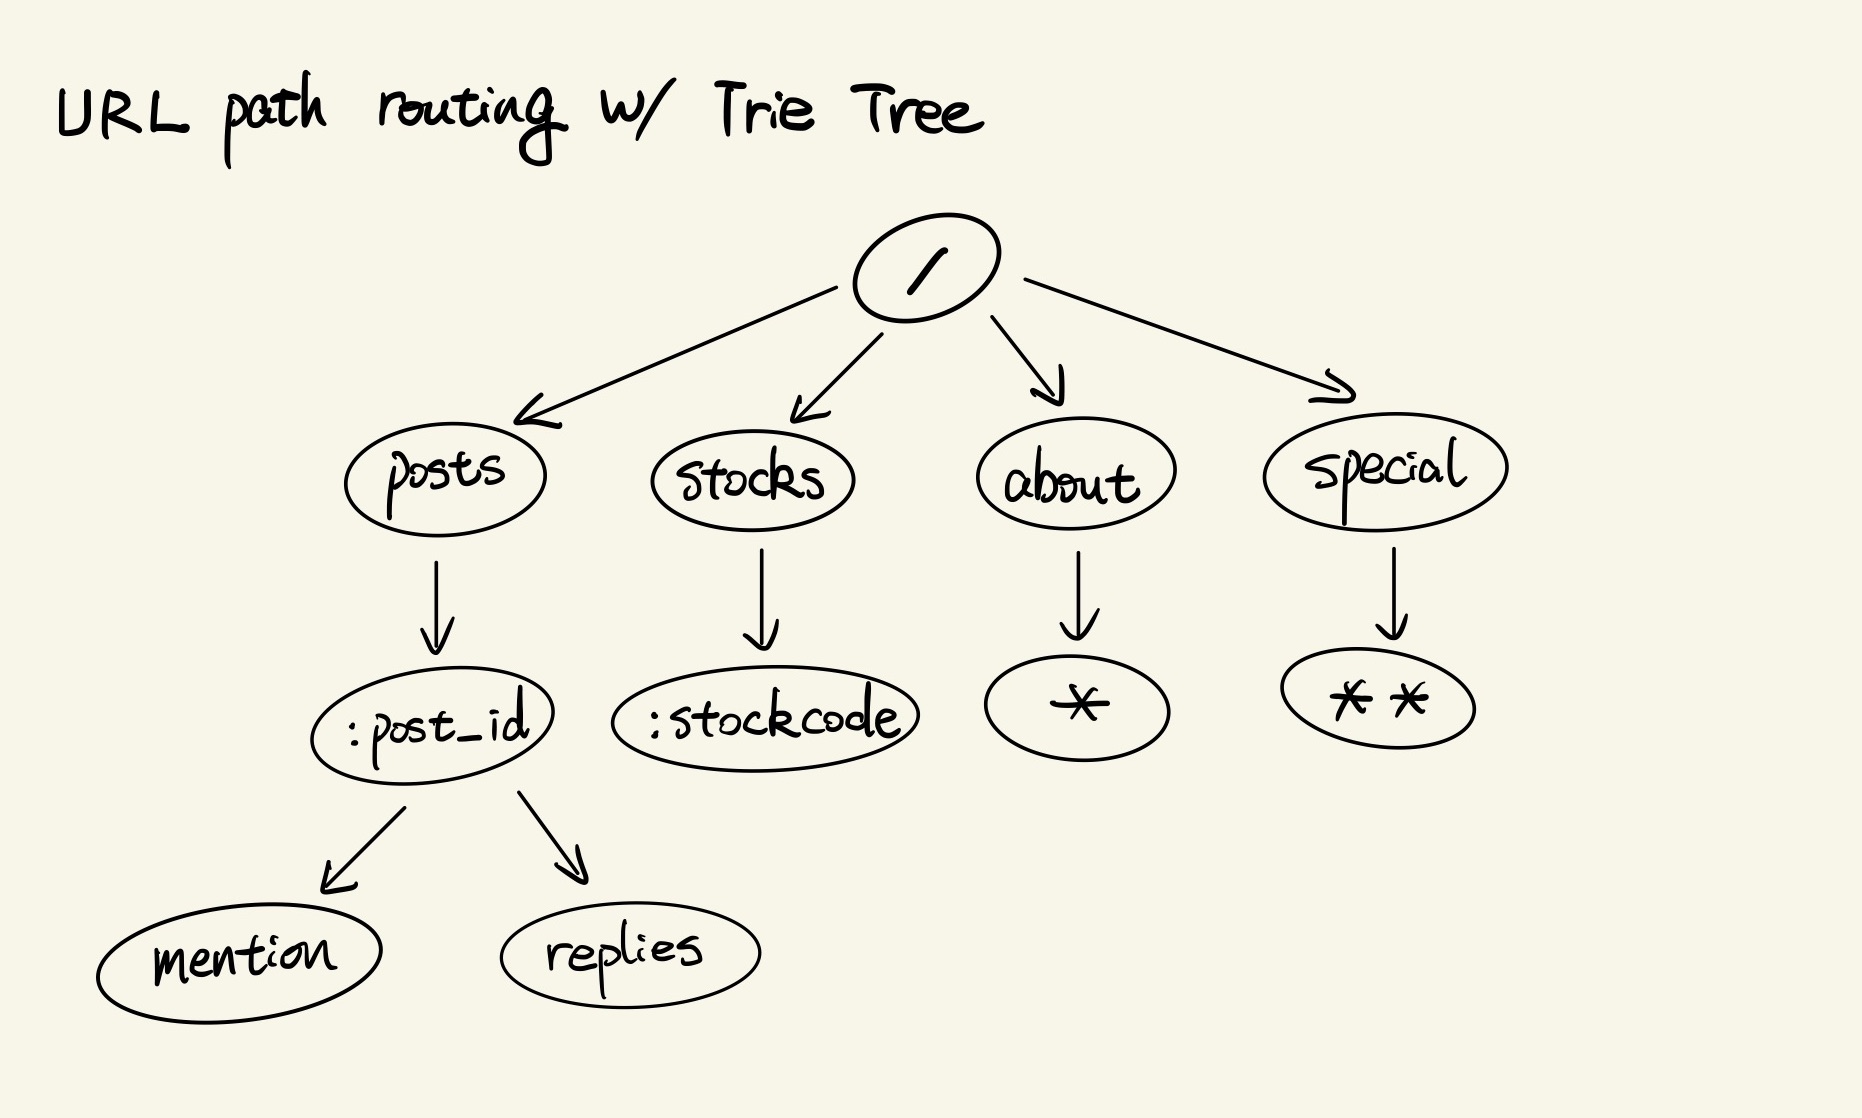 URL path routing with Trie Tree